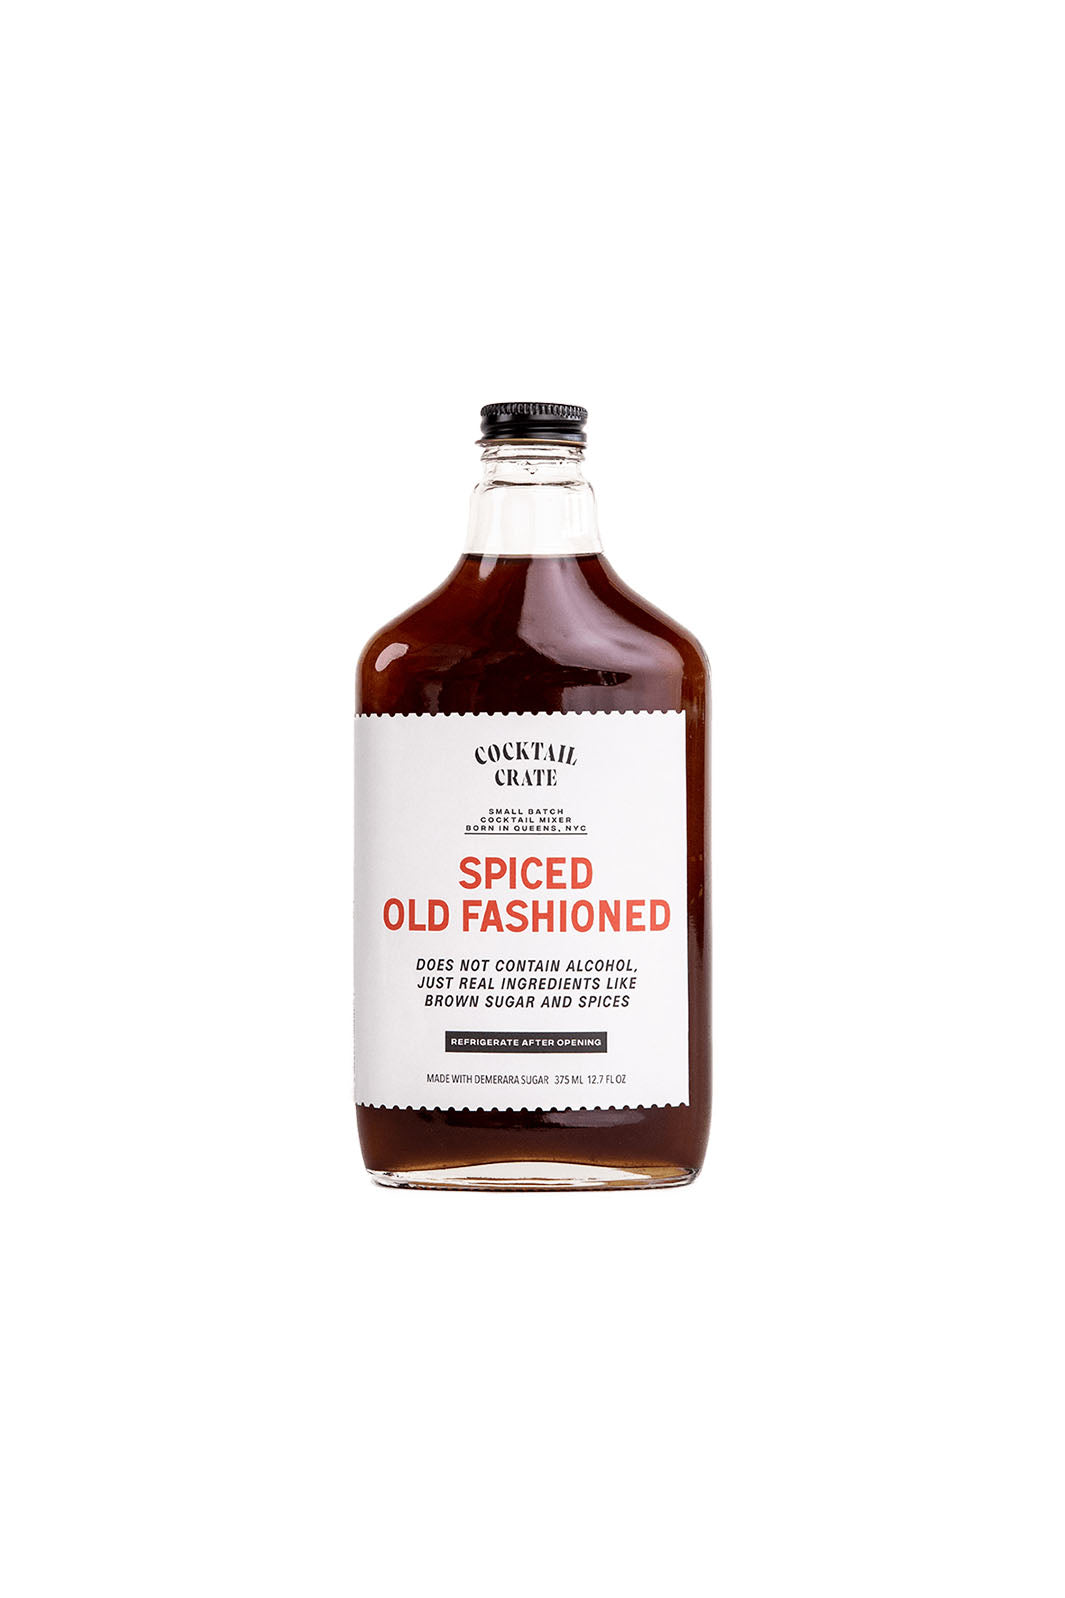 Cocktail Mixer - Spiced Old Fashioned